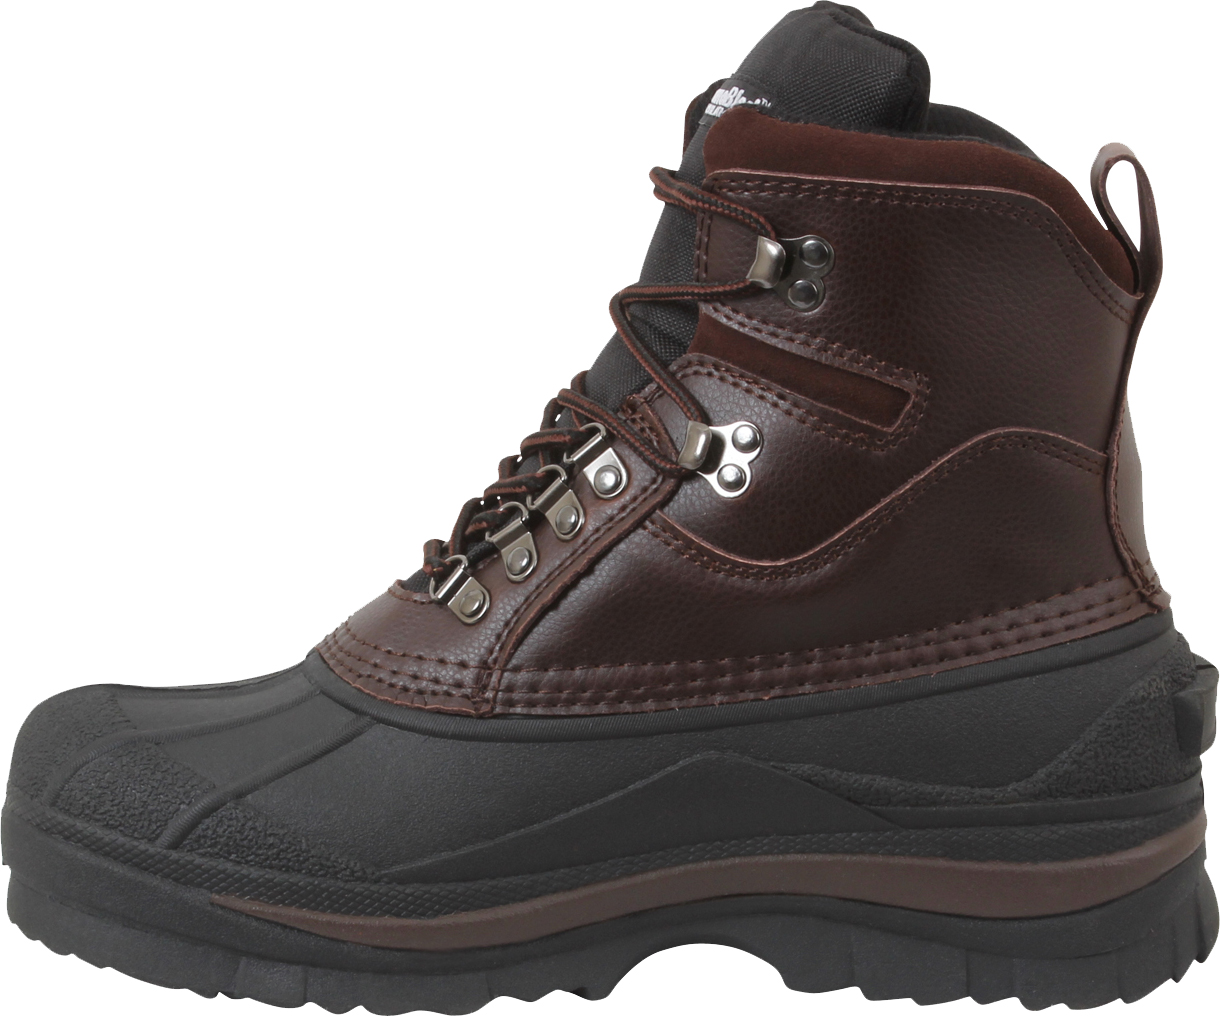 Rothco Venturer Waterproof Cold Weather Hiking Snow Boots